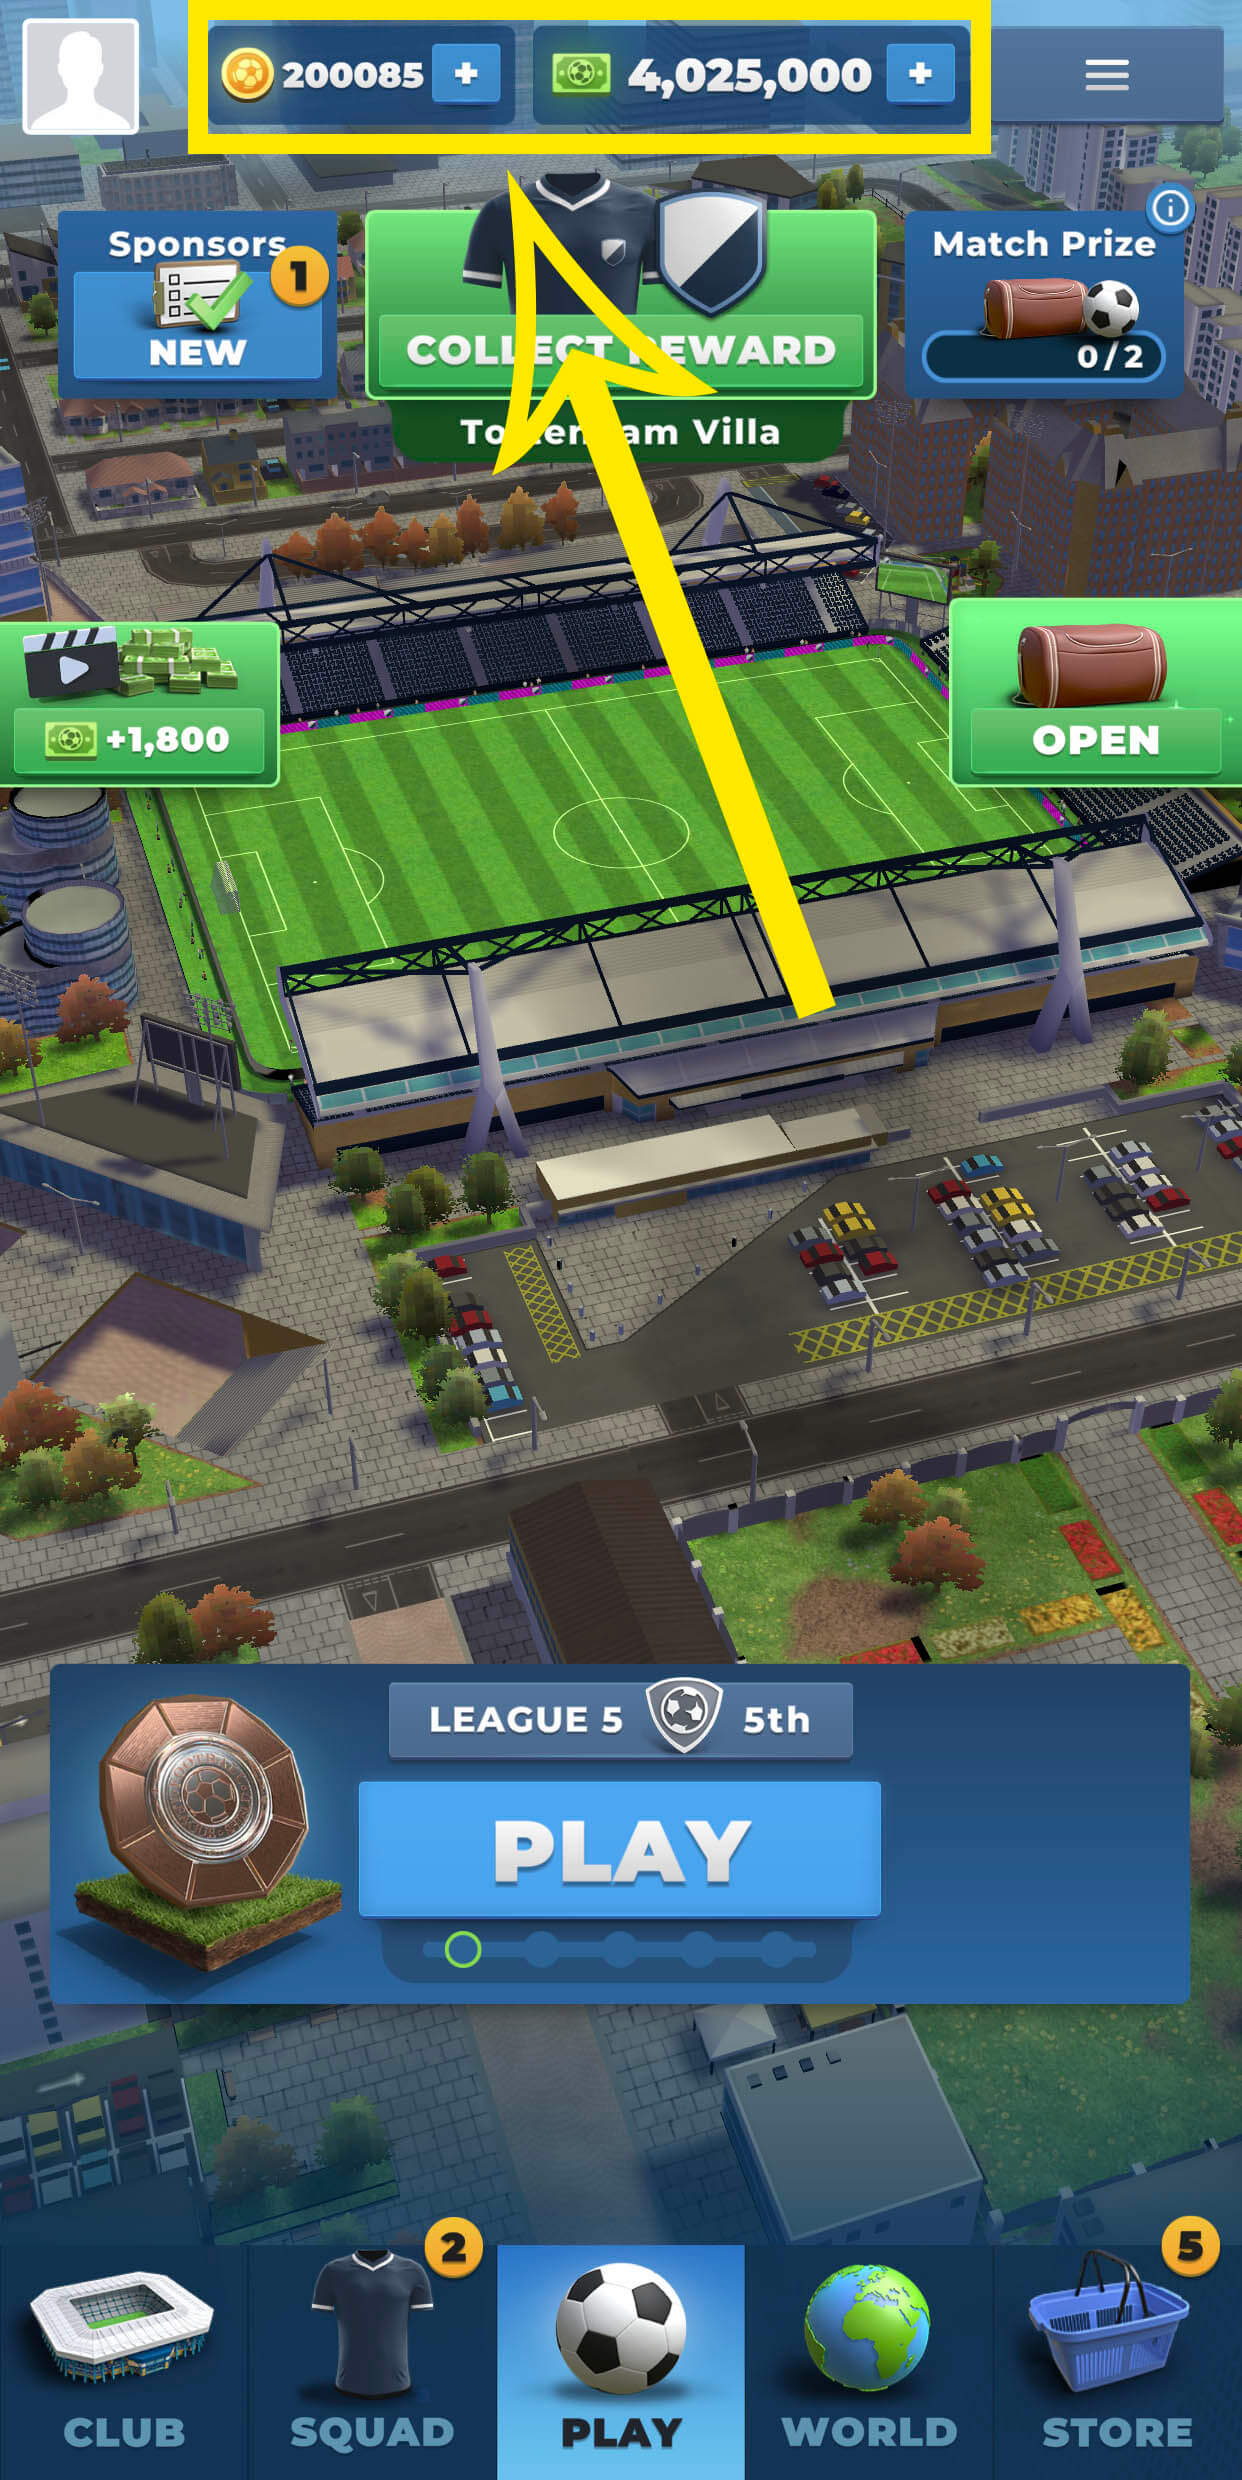 matchday-football-manager-game-mod-ios-1.jpg